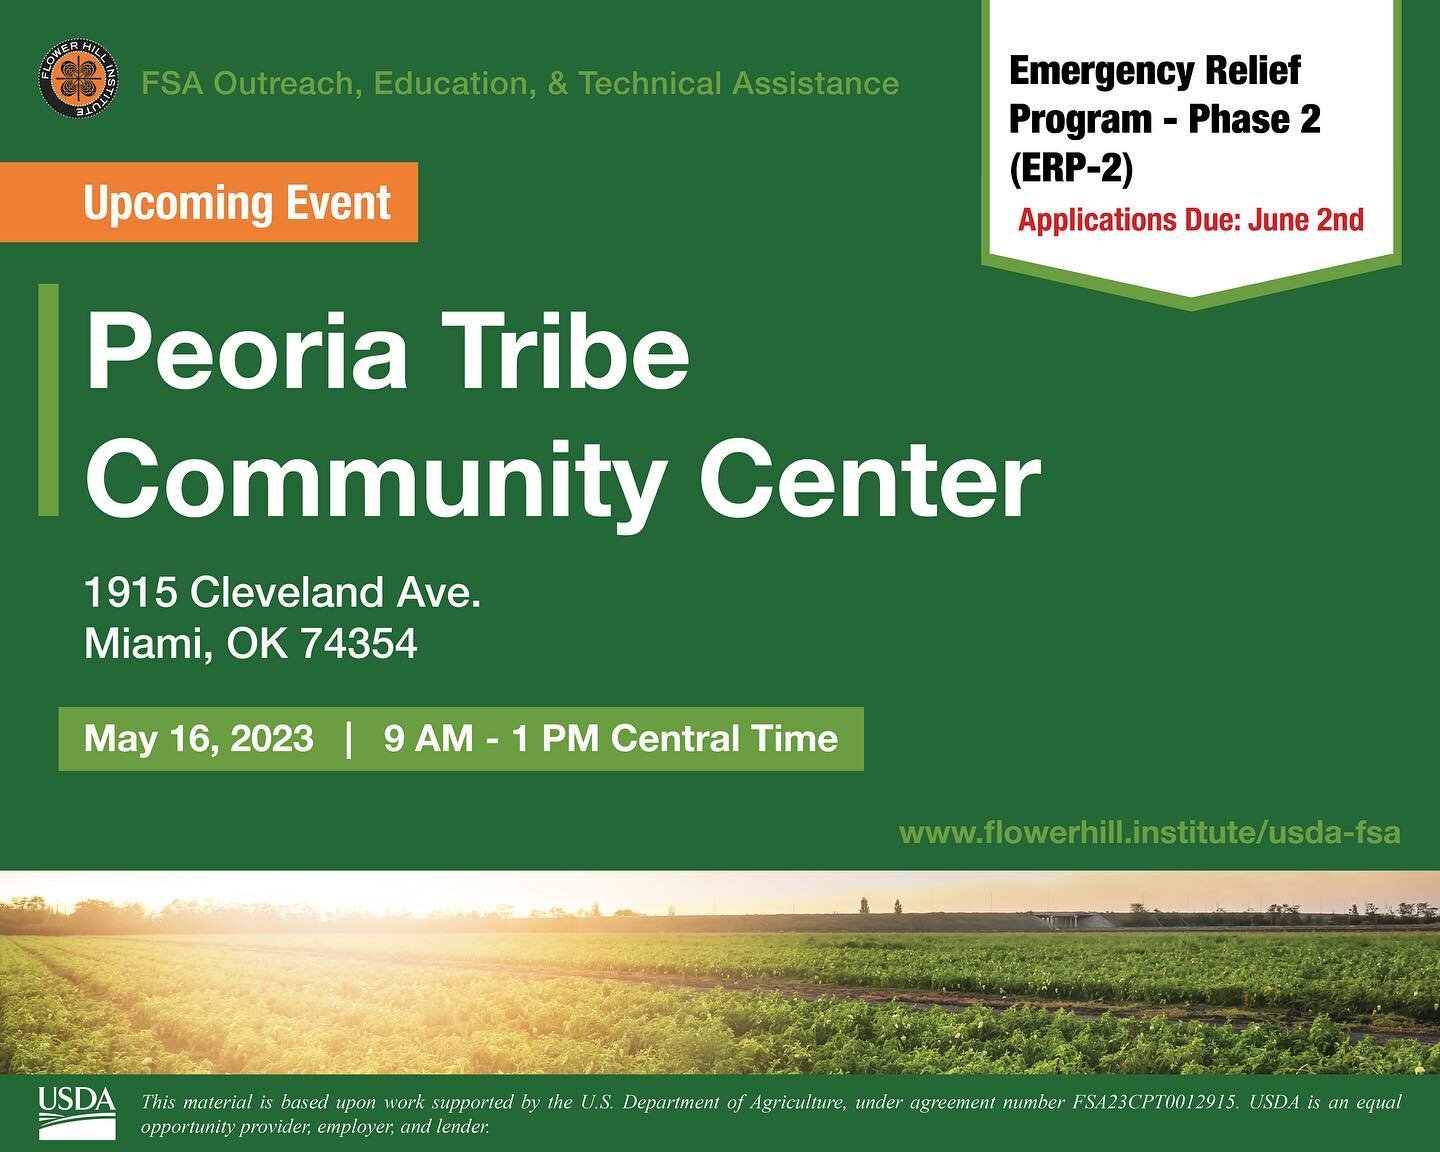 🚨On May 16, 2023, Flower Hill Institute will host an in-person event at the Peoria Tribe Community Center in Miami, Oklahoma, to provide educational and technical assistance to local farmers and producers interested in FSA program funding.

Local fa